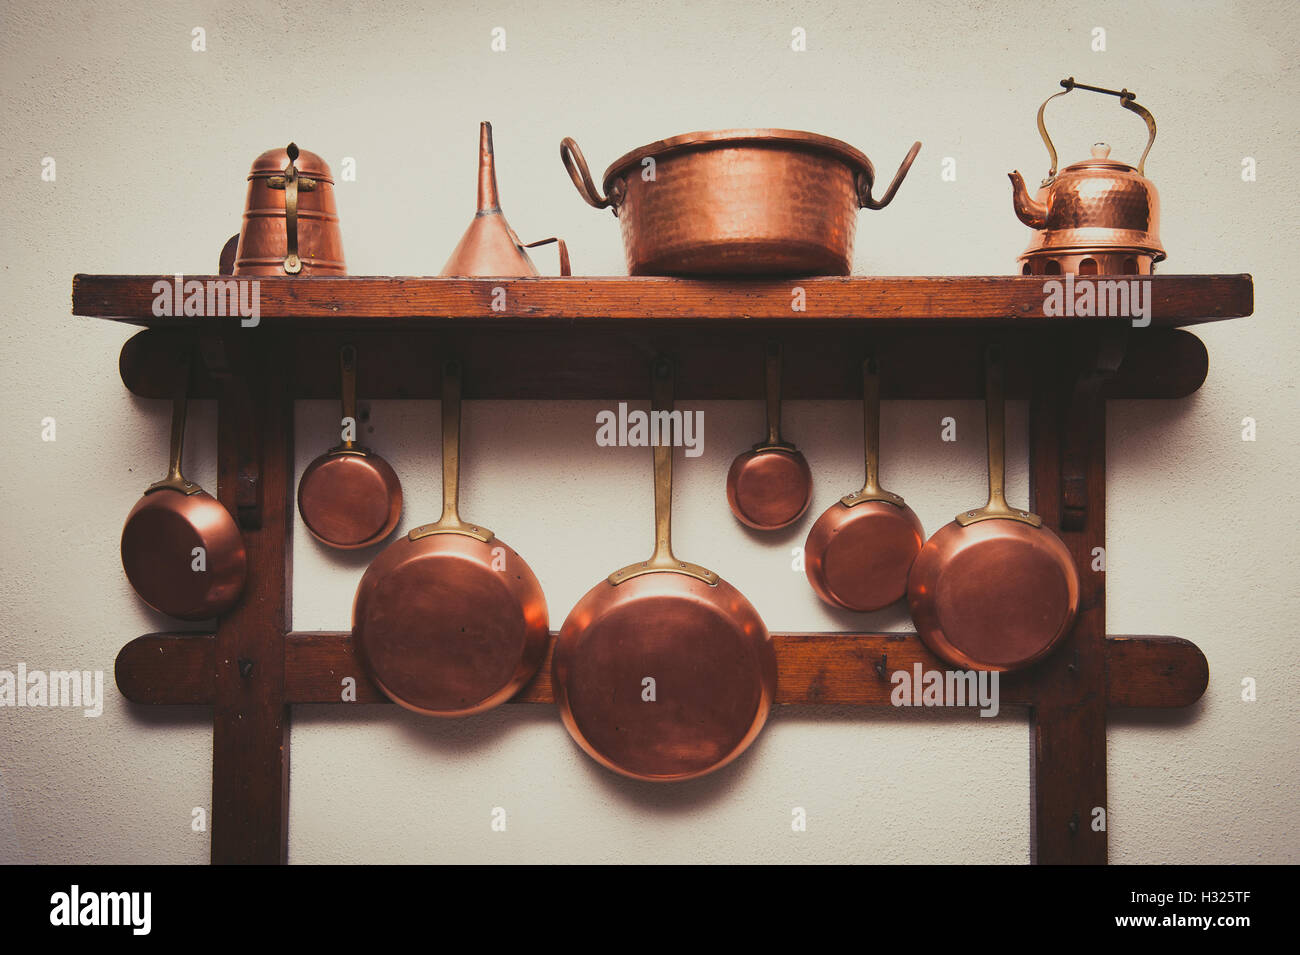 Different kind of vintage copper cookware, pans, coffee pot and funnel hanging on wooden shelf in kitchen with white rough wall Stock Photo